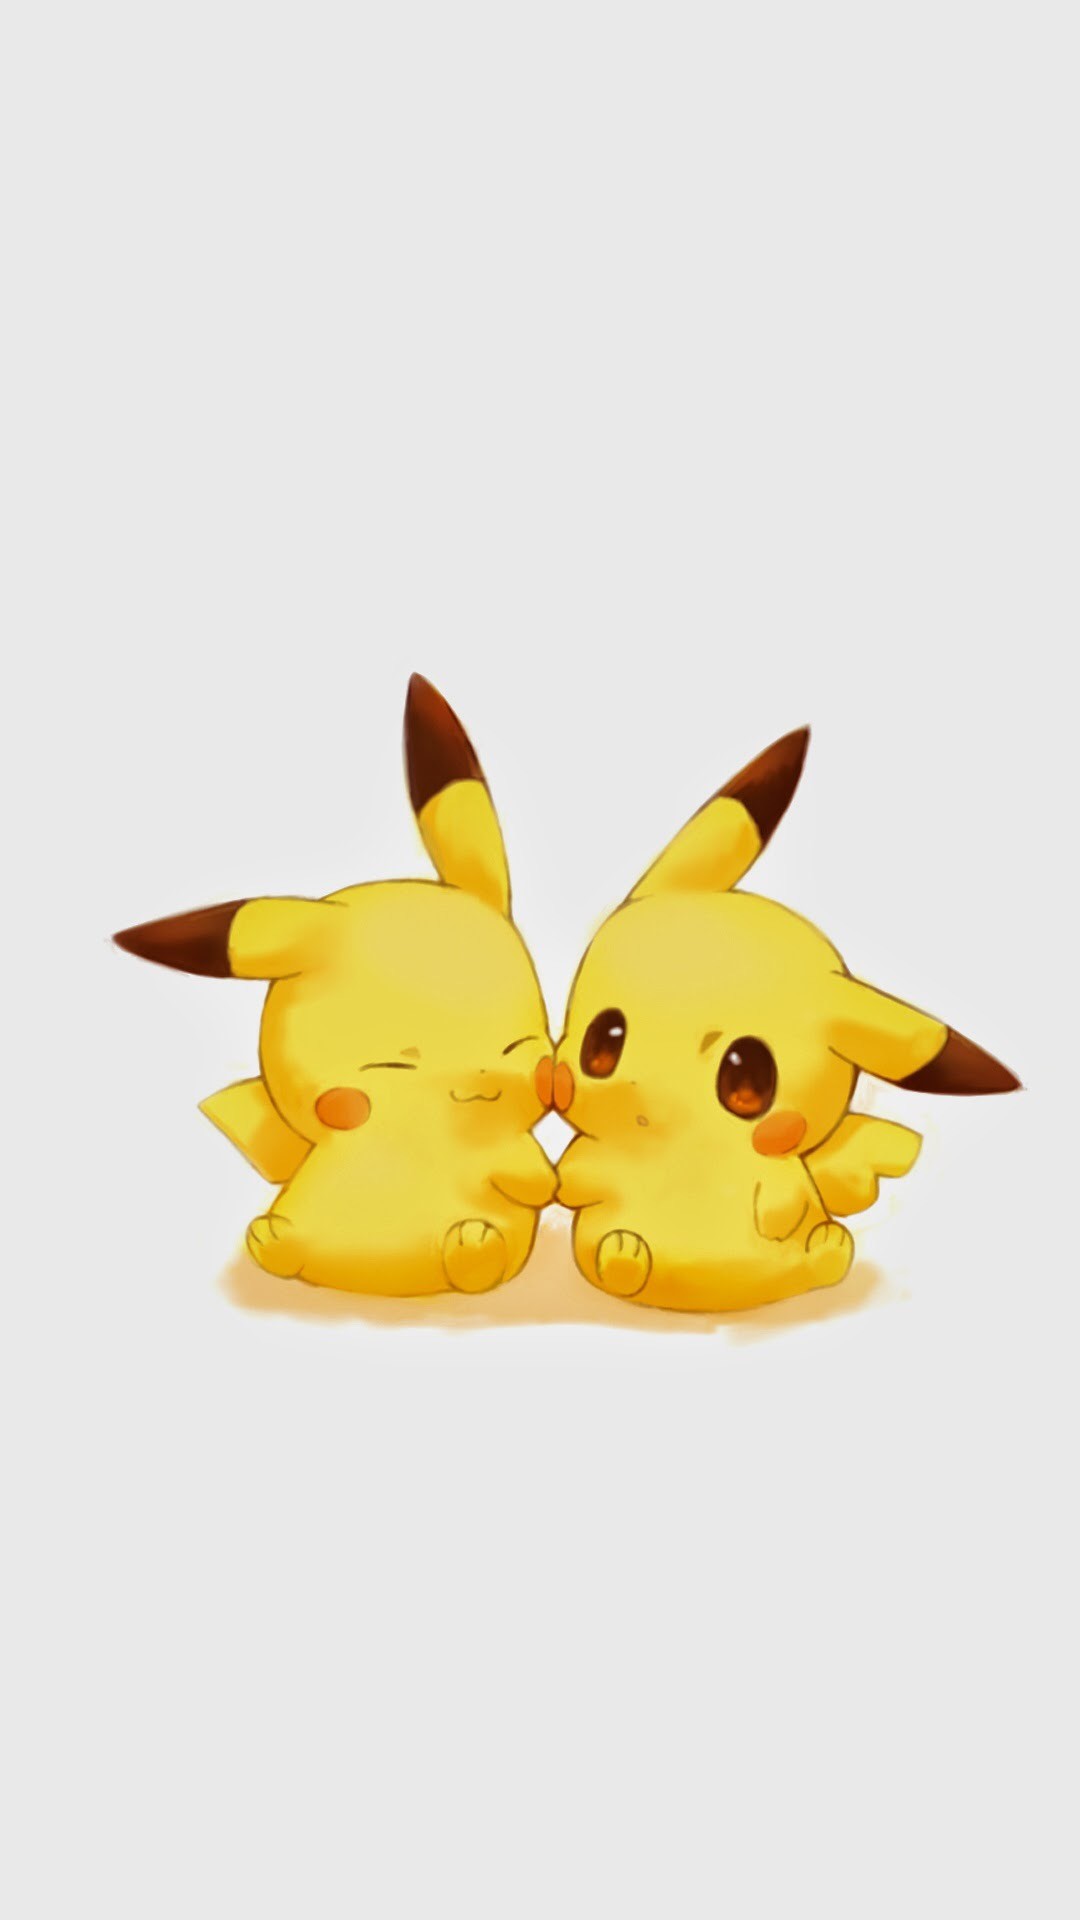 Tap image for more funny cute Pikachu wallpaper! Pikachu – @mobile9 |  Wallpapers for